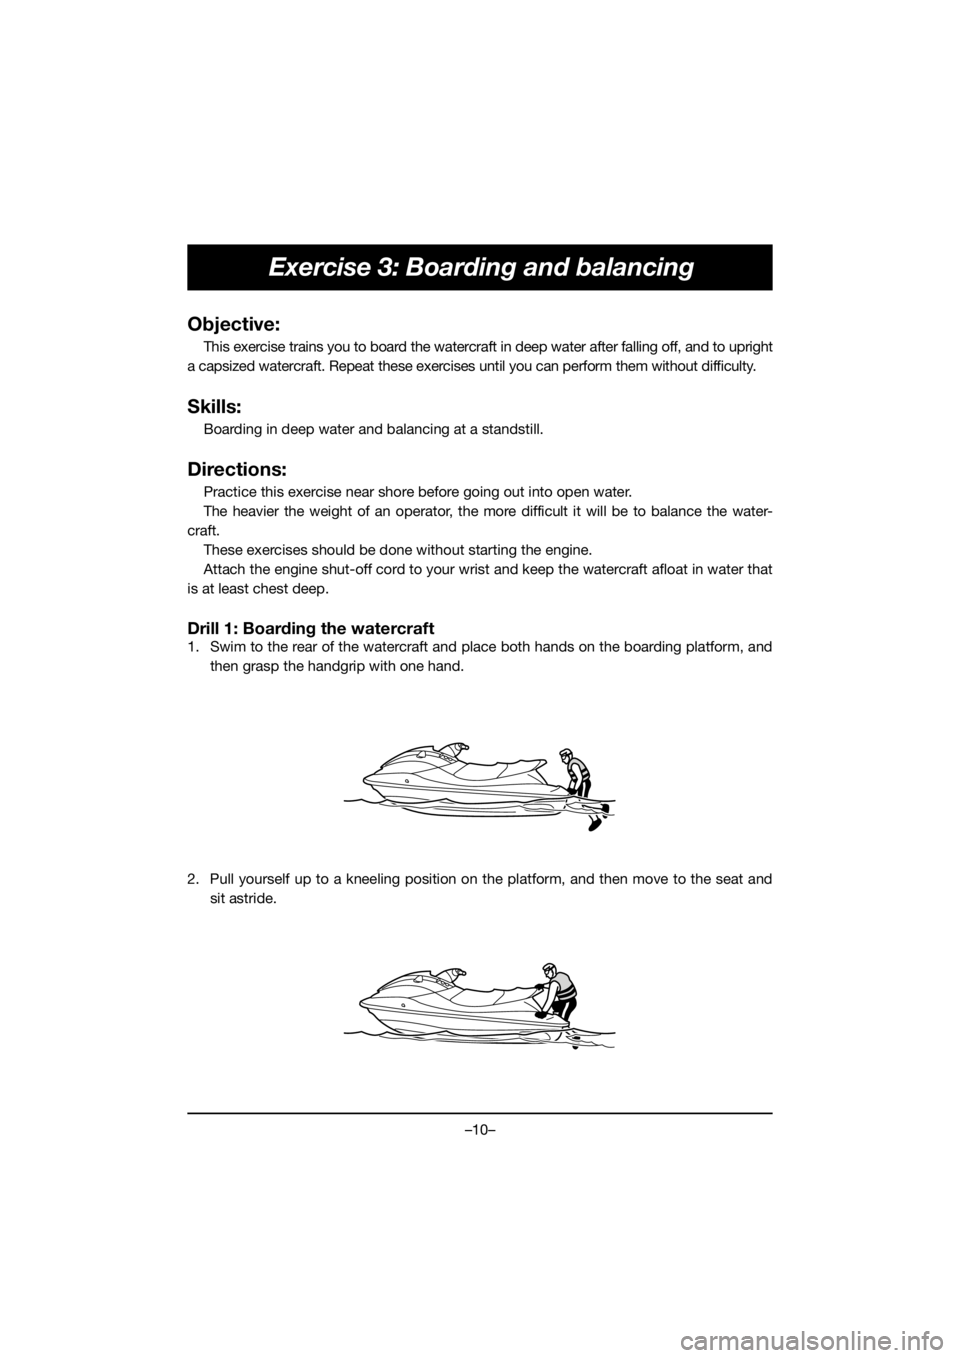 YAMAHA EX 2019  Manual de utilização (in Portuguese) –10–
Exercise 3: Boarding and balancing
Objective:
This exercise trains you to board the watercraft in deep water after falling off, and to upright
a capsized watercraft. Repeat these exercises un